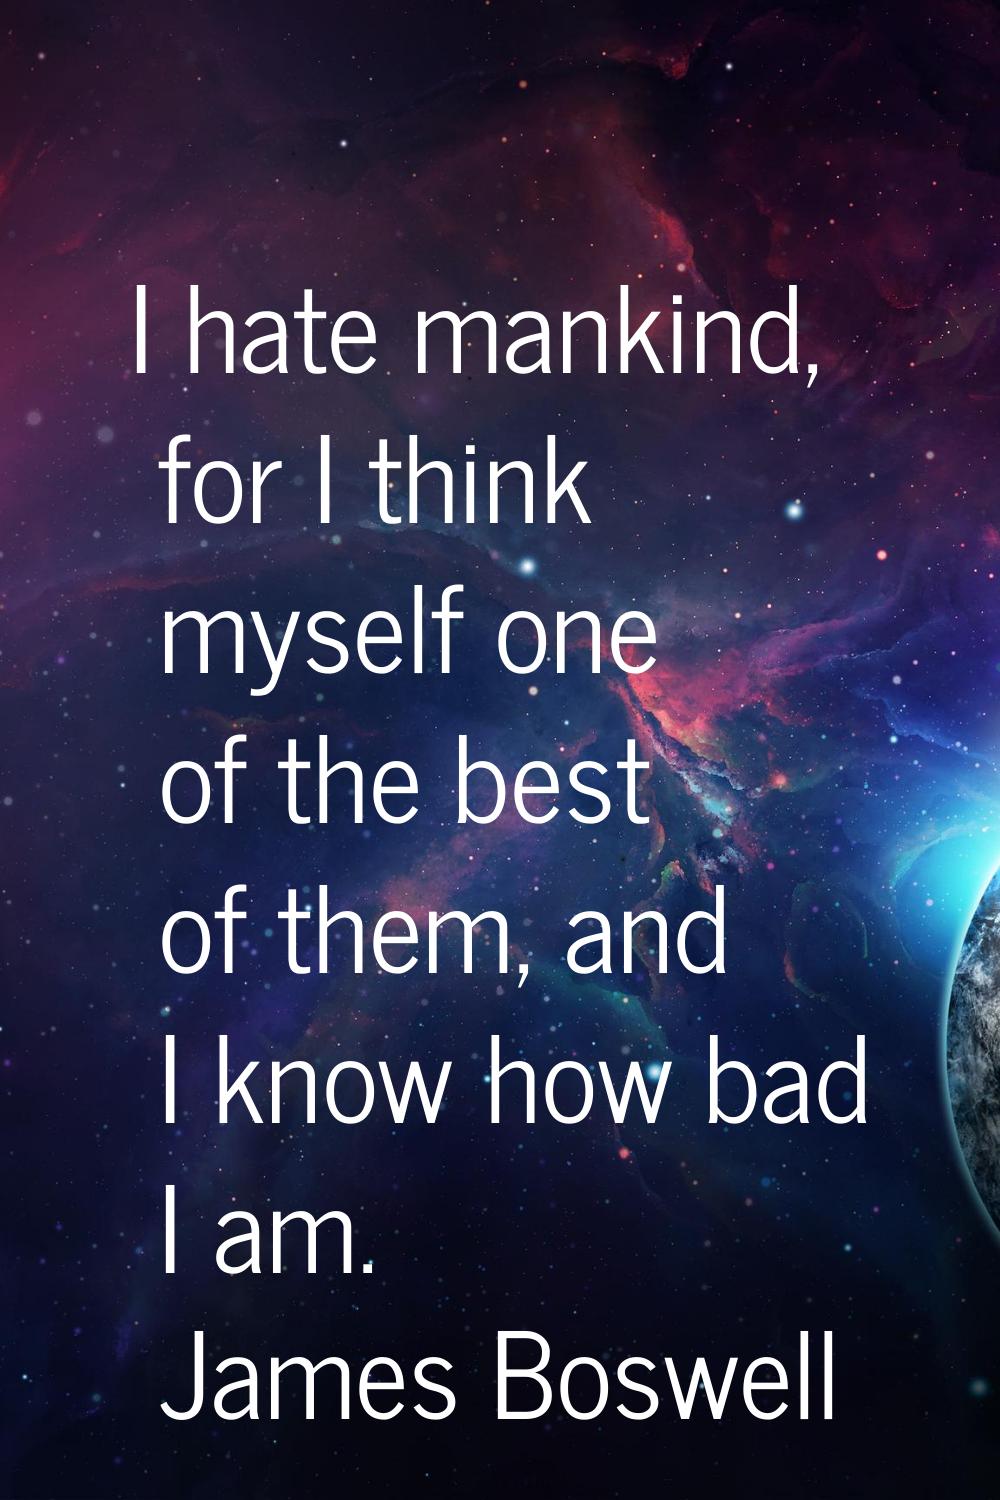 I hate mankind, for I think myself one of the best of them, and I know how bad I am.